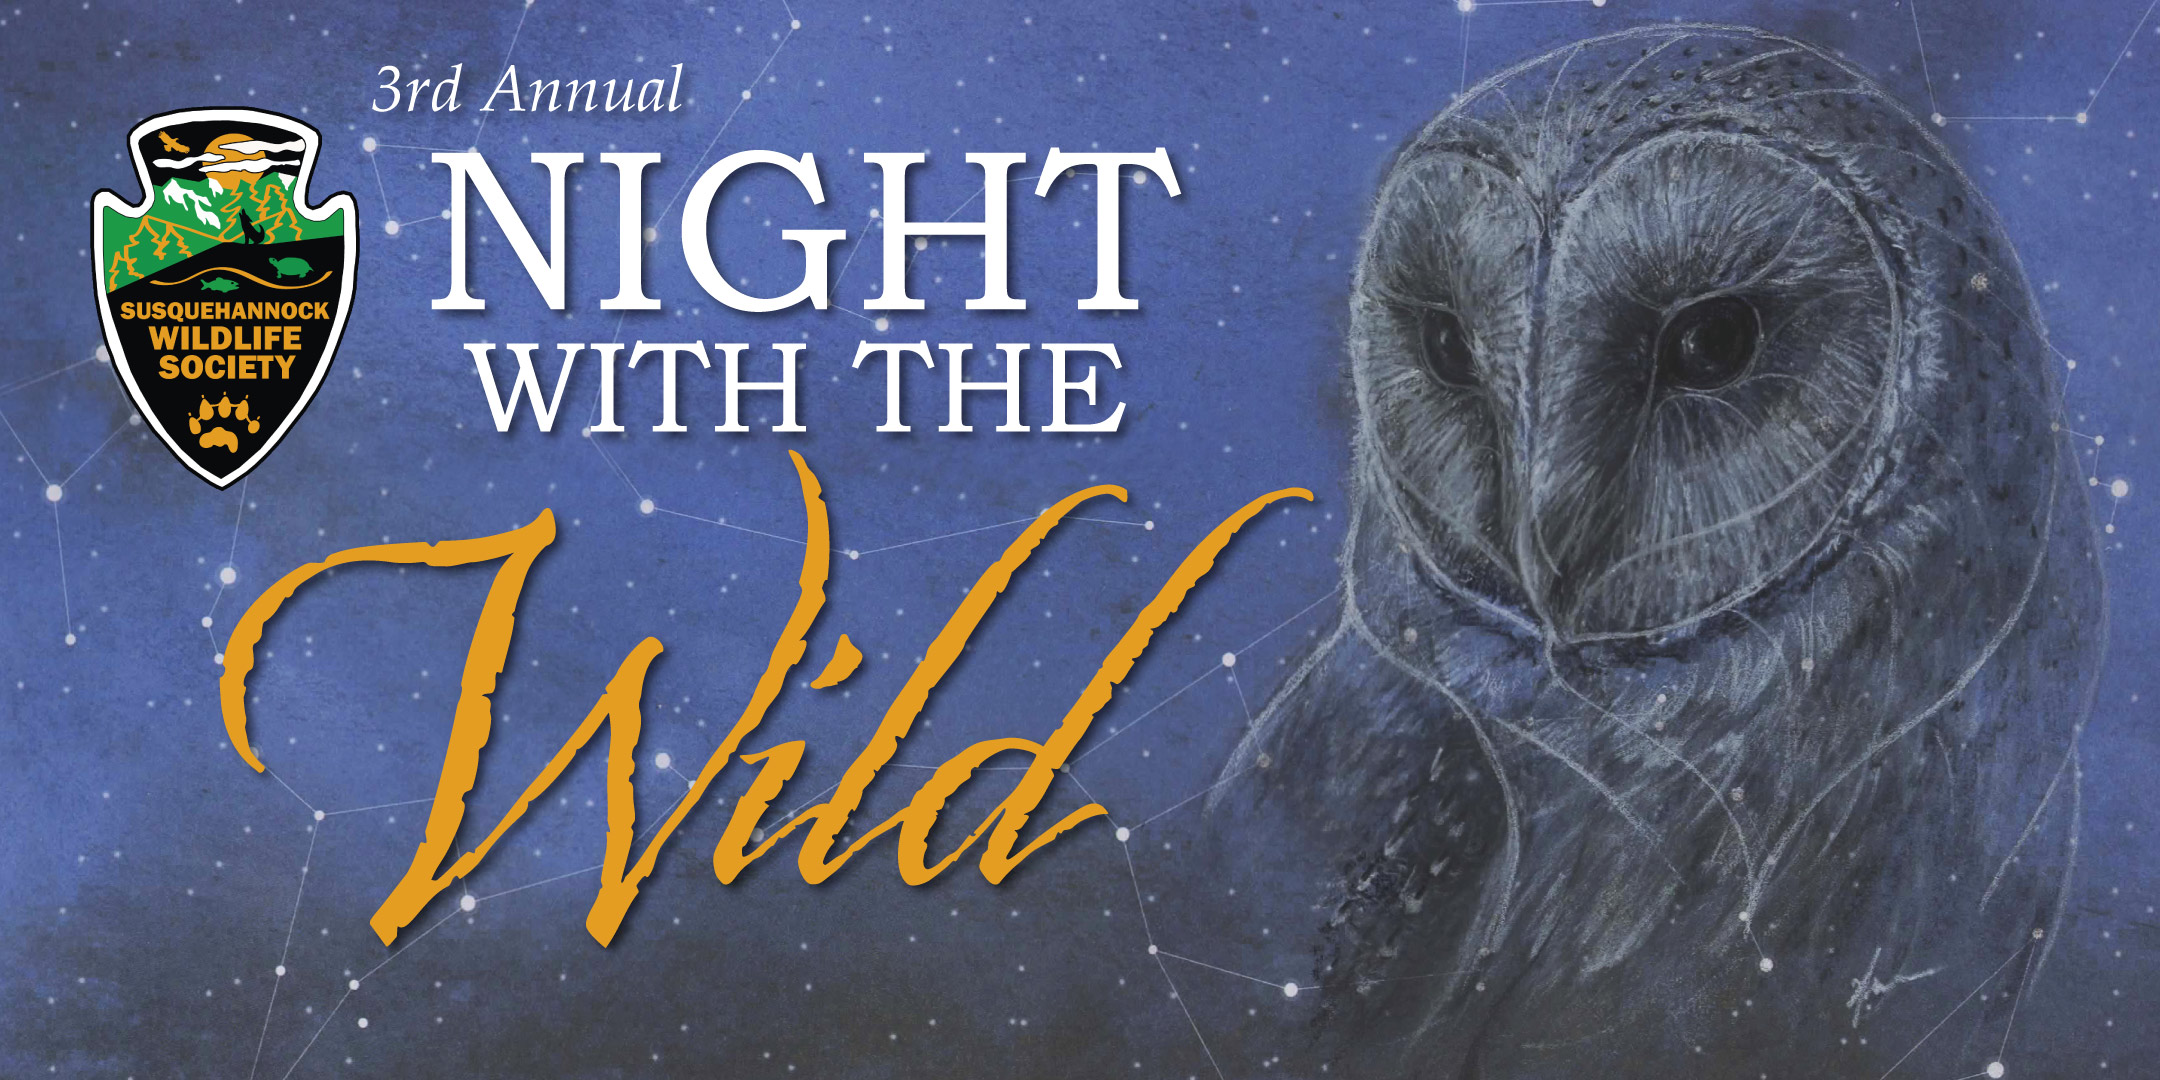 3RD ANNUAL ‘NIGHT WITH THE WILD’ FUNDRAISER RETURNS TO HARFORD